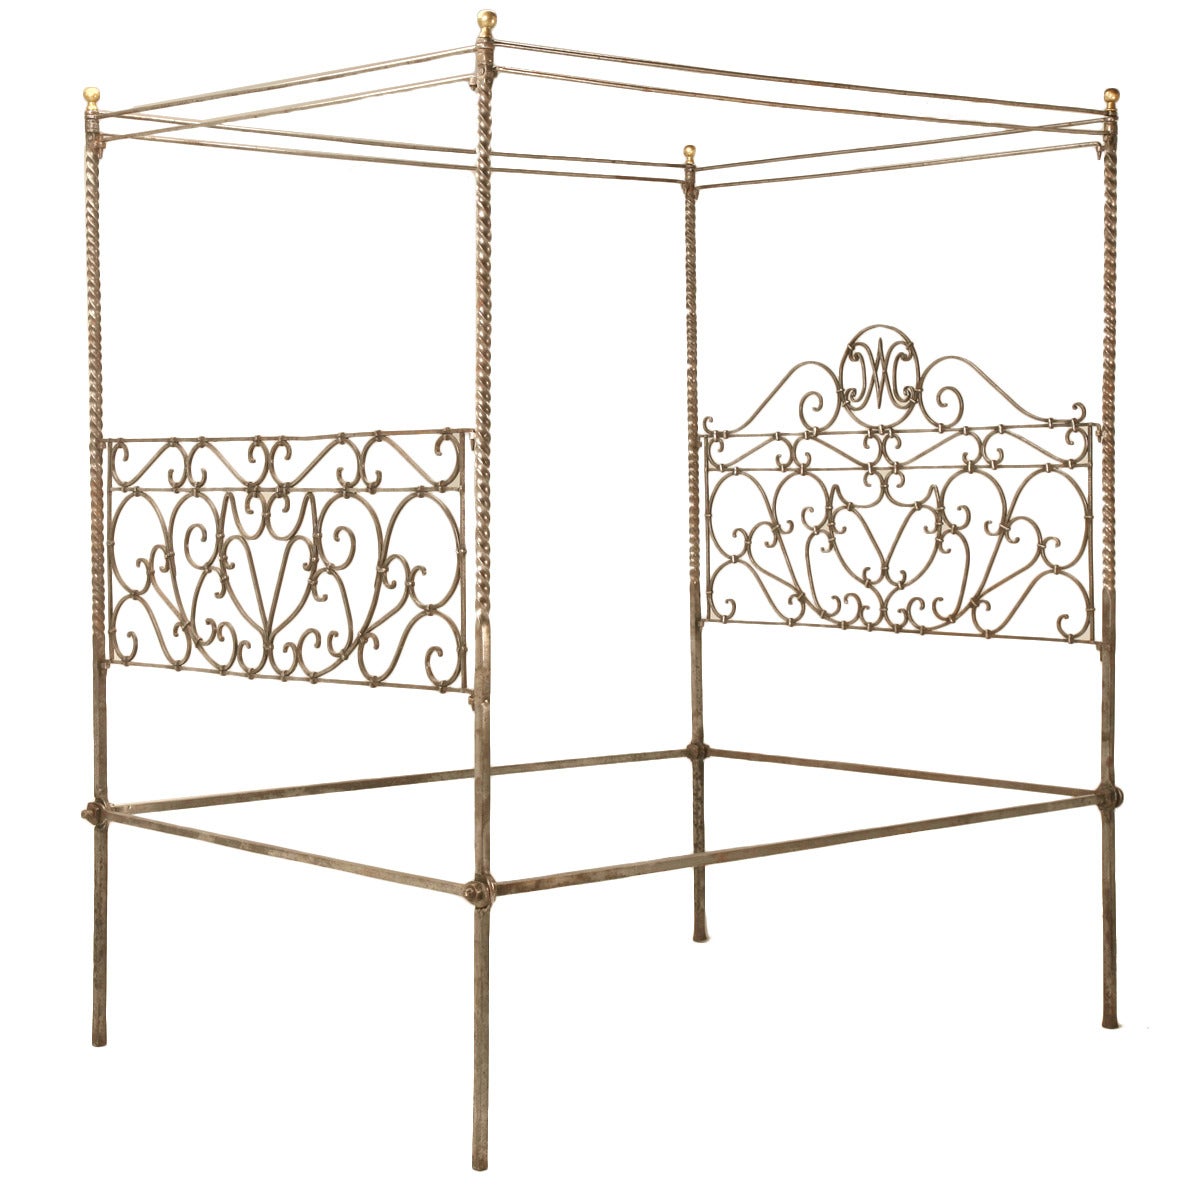 Circa 1880 French Hand Forged Iron Canopy Bed with Twists and Brass Finials